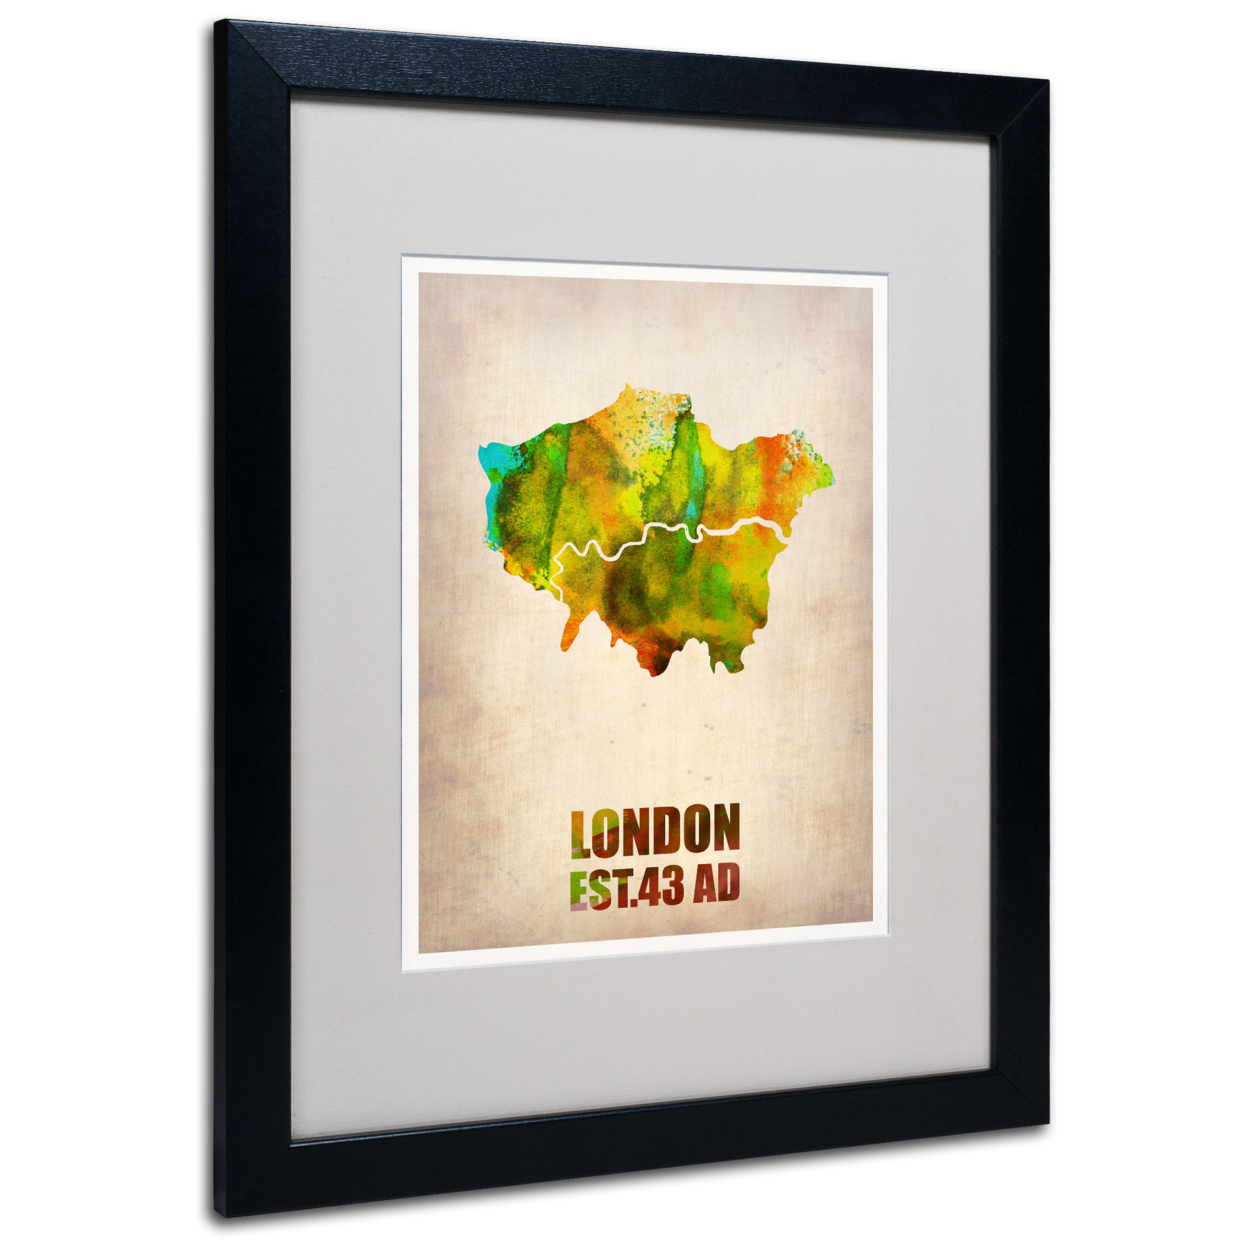 Naxart 'London Watercolor Map' Black Wooden Framed Art 18 X 22 Inches